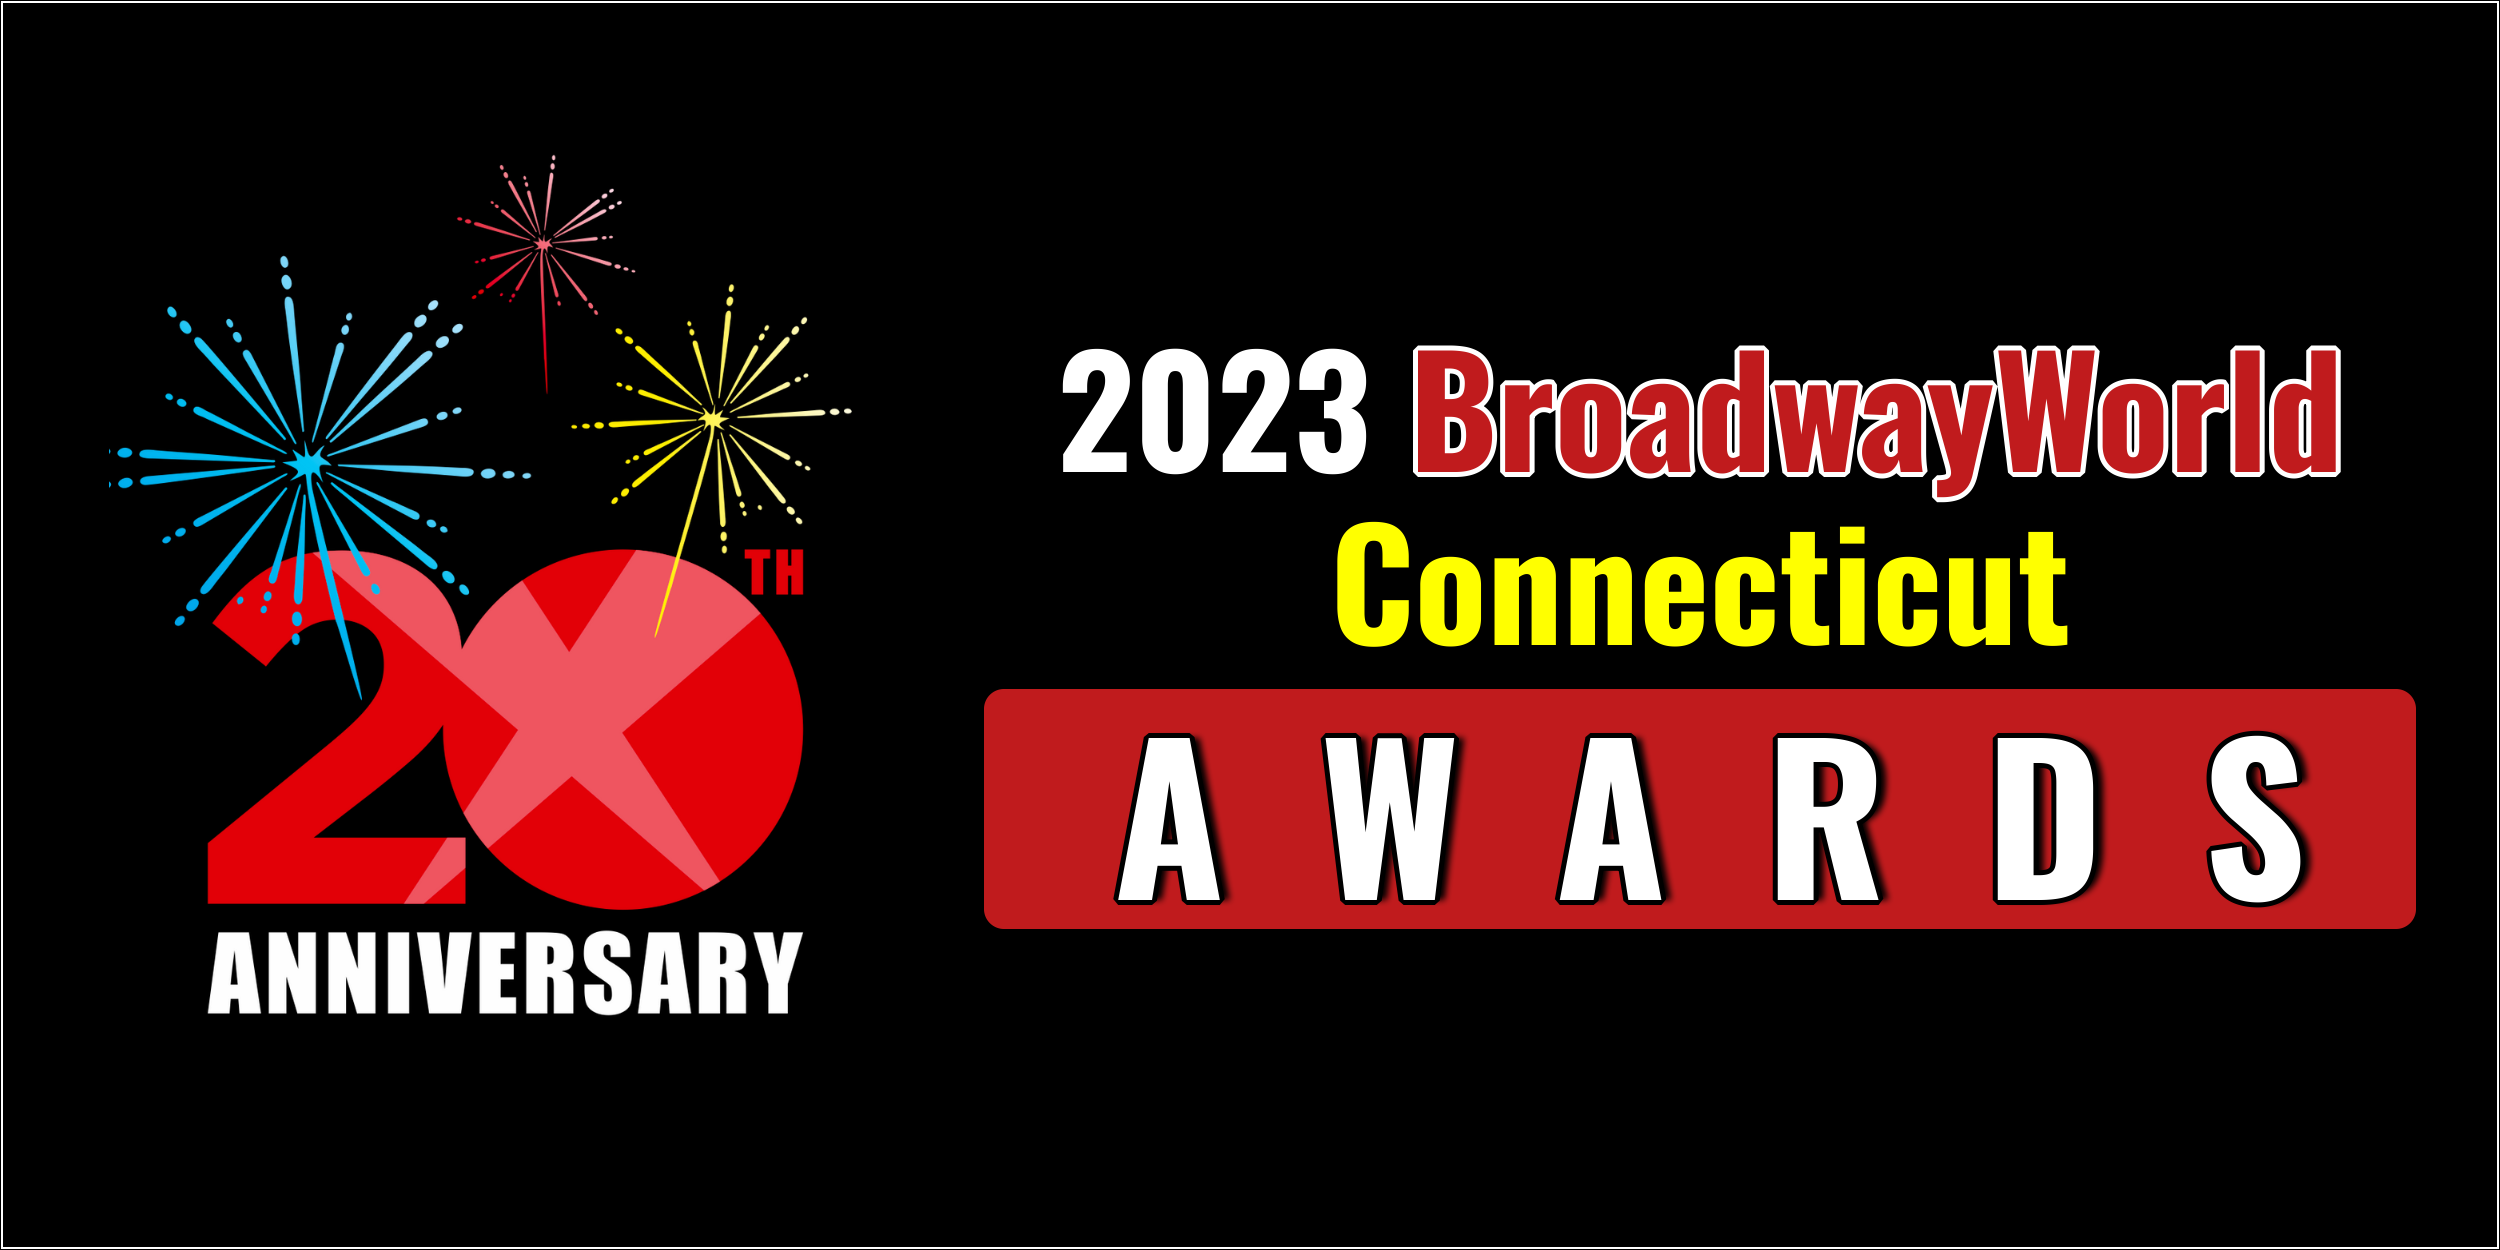 Latest Standings Announced For The 2023 BroadwayWorld Connecticut Awards;  Leads Favorite  Photo